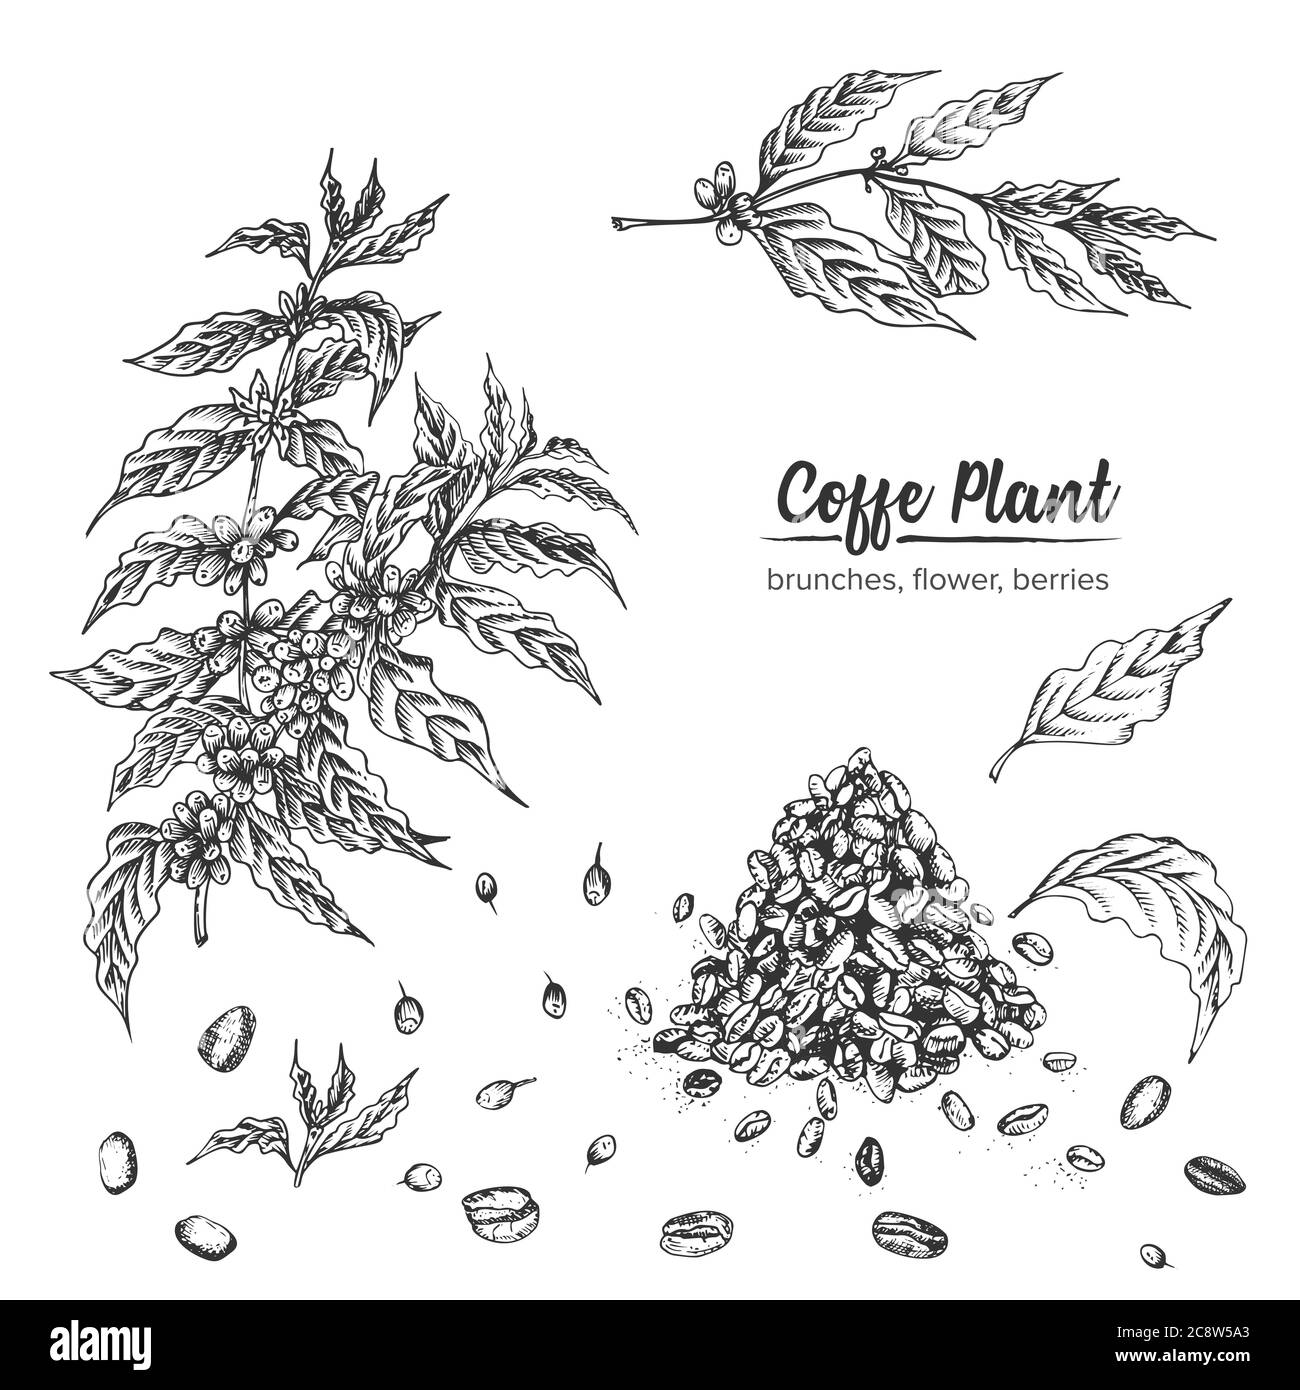 Hand drawn coffee plant illustration Vintage sketch style coffee plant  label text illustration this vector illustration is  CanStock